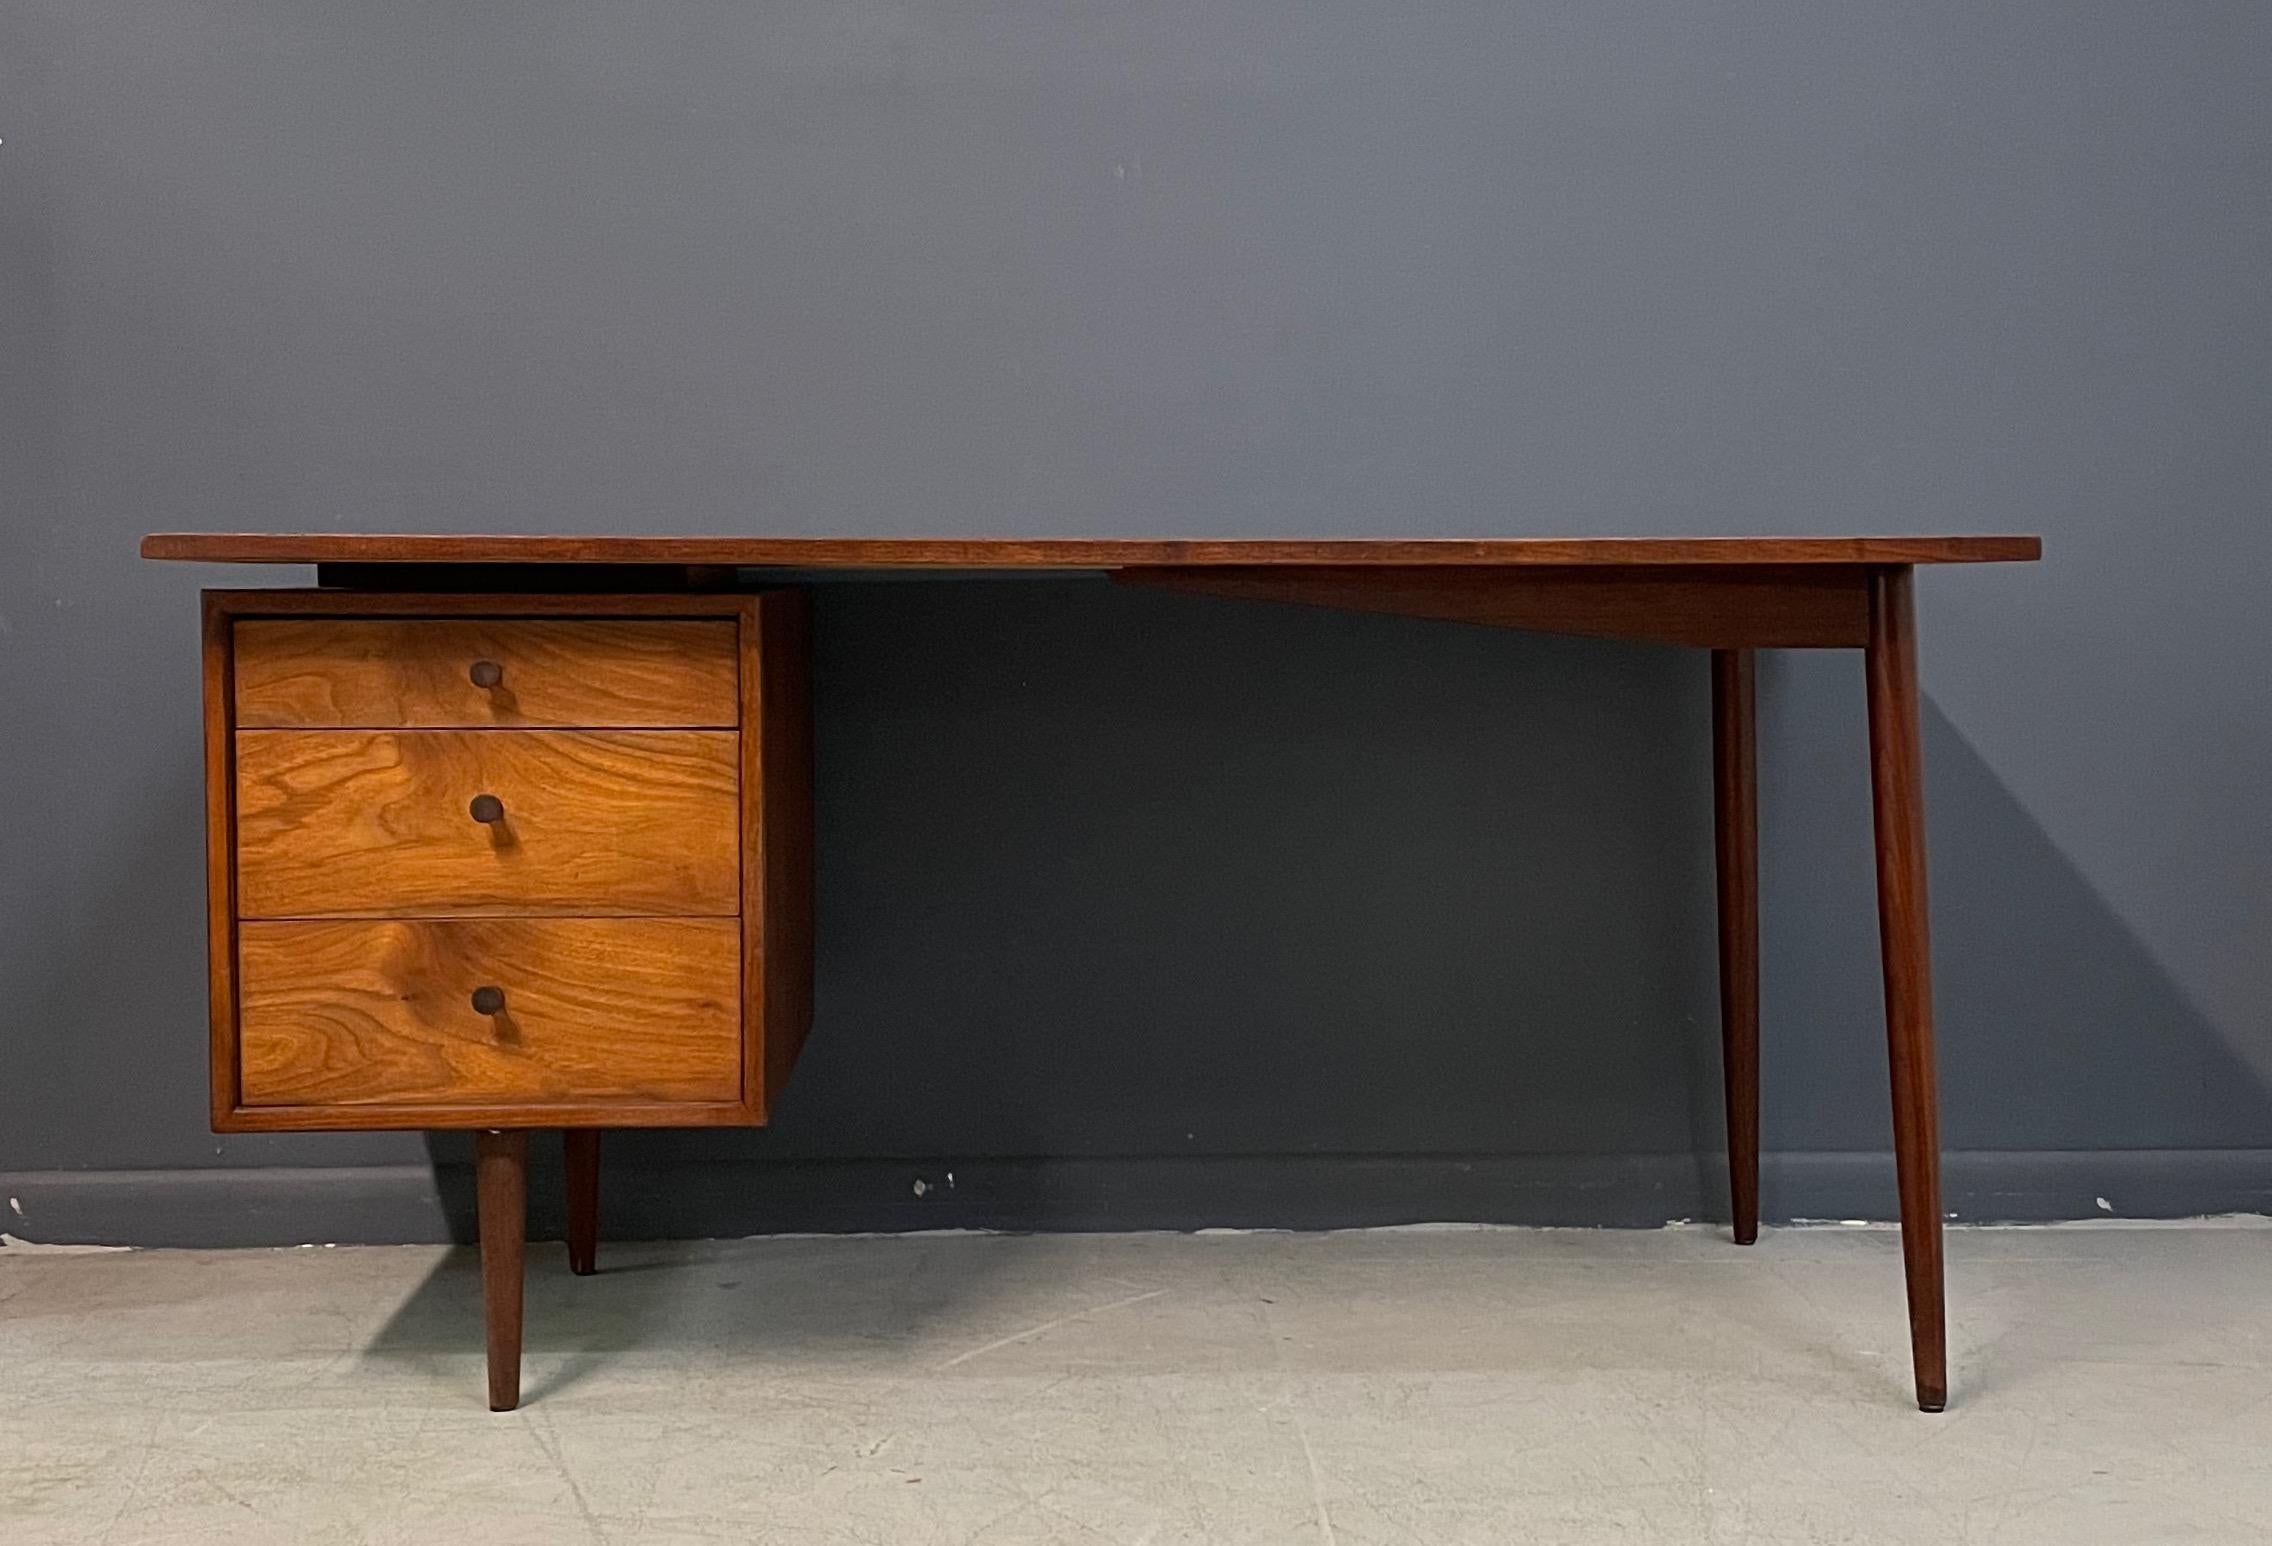 Richard Artschwager (NY 1923-2013). Fine bench made desk in walnut. An iconic piece of mid century furniture design. Measures: 60